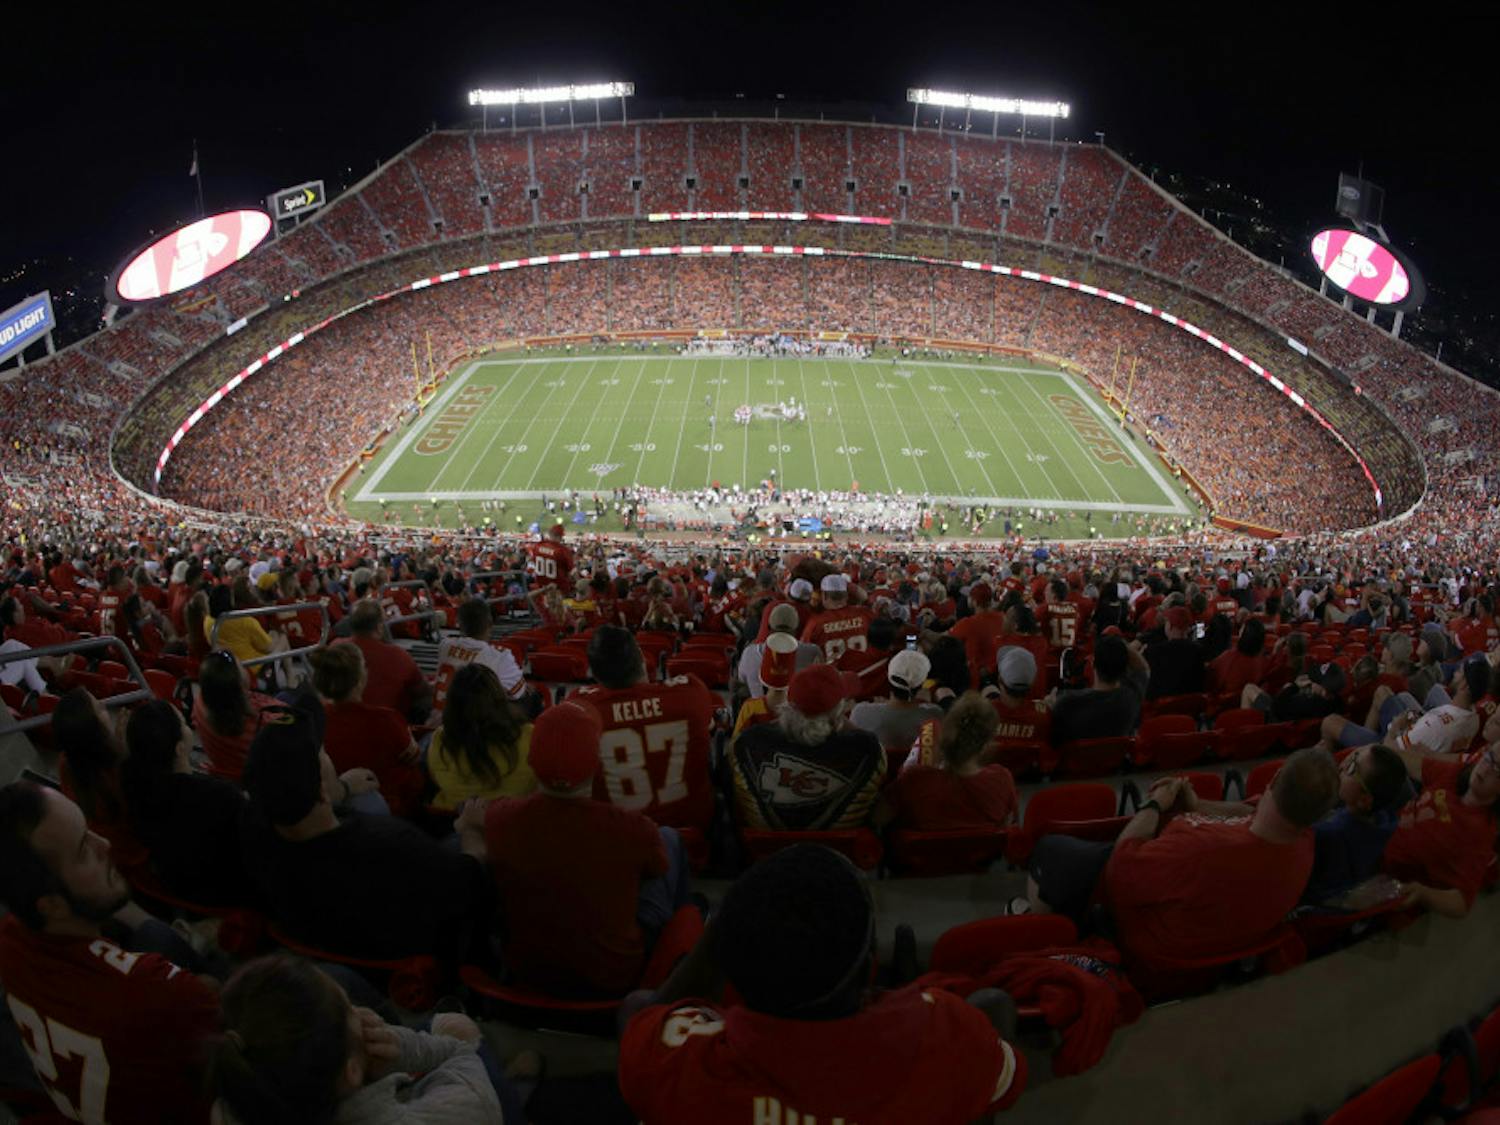 FILE - In this Aug. 24, 2019, file photo, the Kansas City Chiefs and the San Francisco 49ers play during the second half of an NFL preseason football game at Arrowhead Stadium in Kansas City, Mo. The Chiefs will open defense of their Super Bowl championship by hosting Houston on Sept. 10 in the NFL's annual kickoff game — pending developments in the coronavirus pandemic, of course. (AP Photo/Charlie Riedel, File)